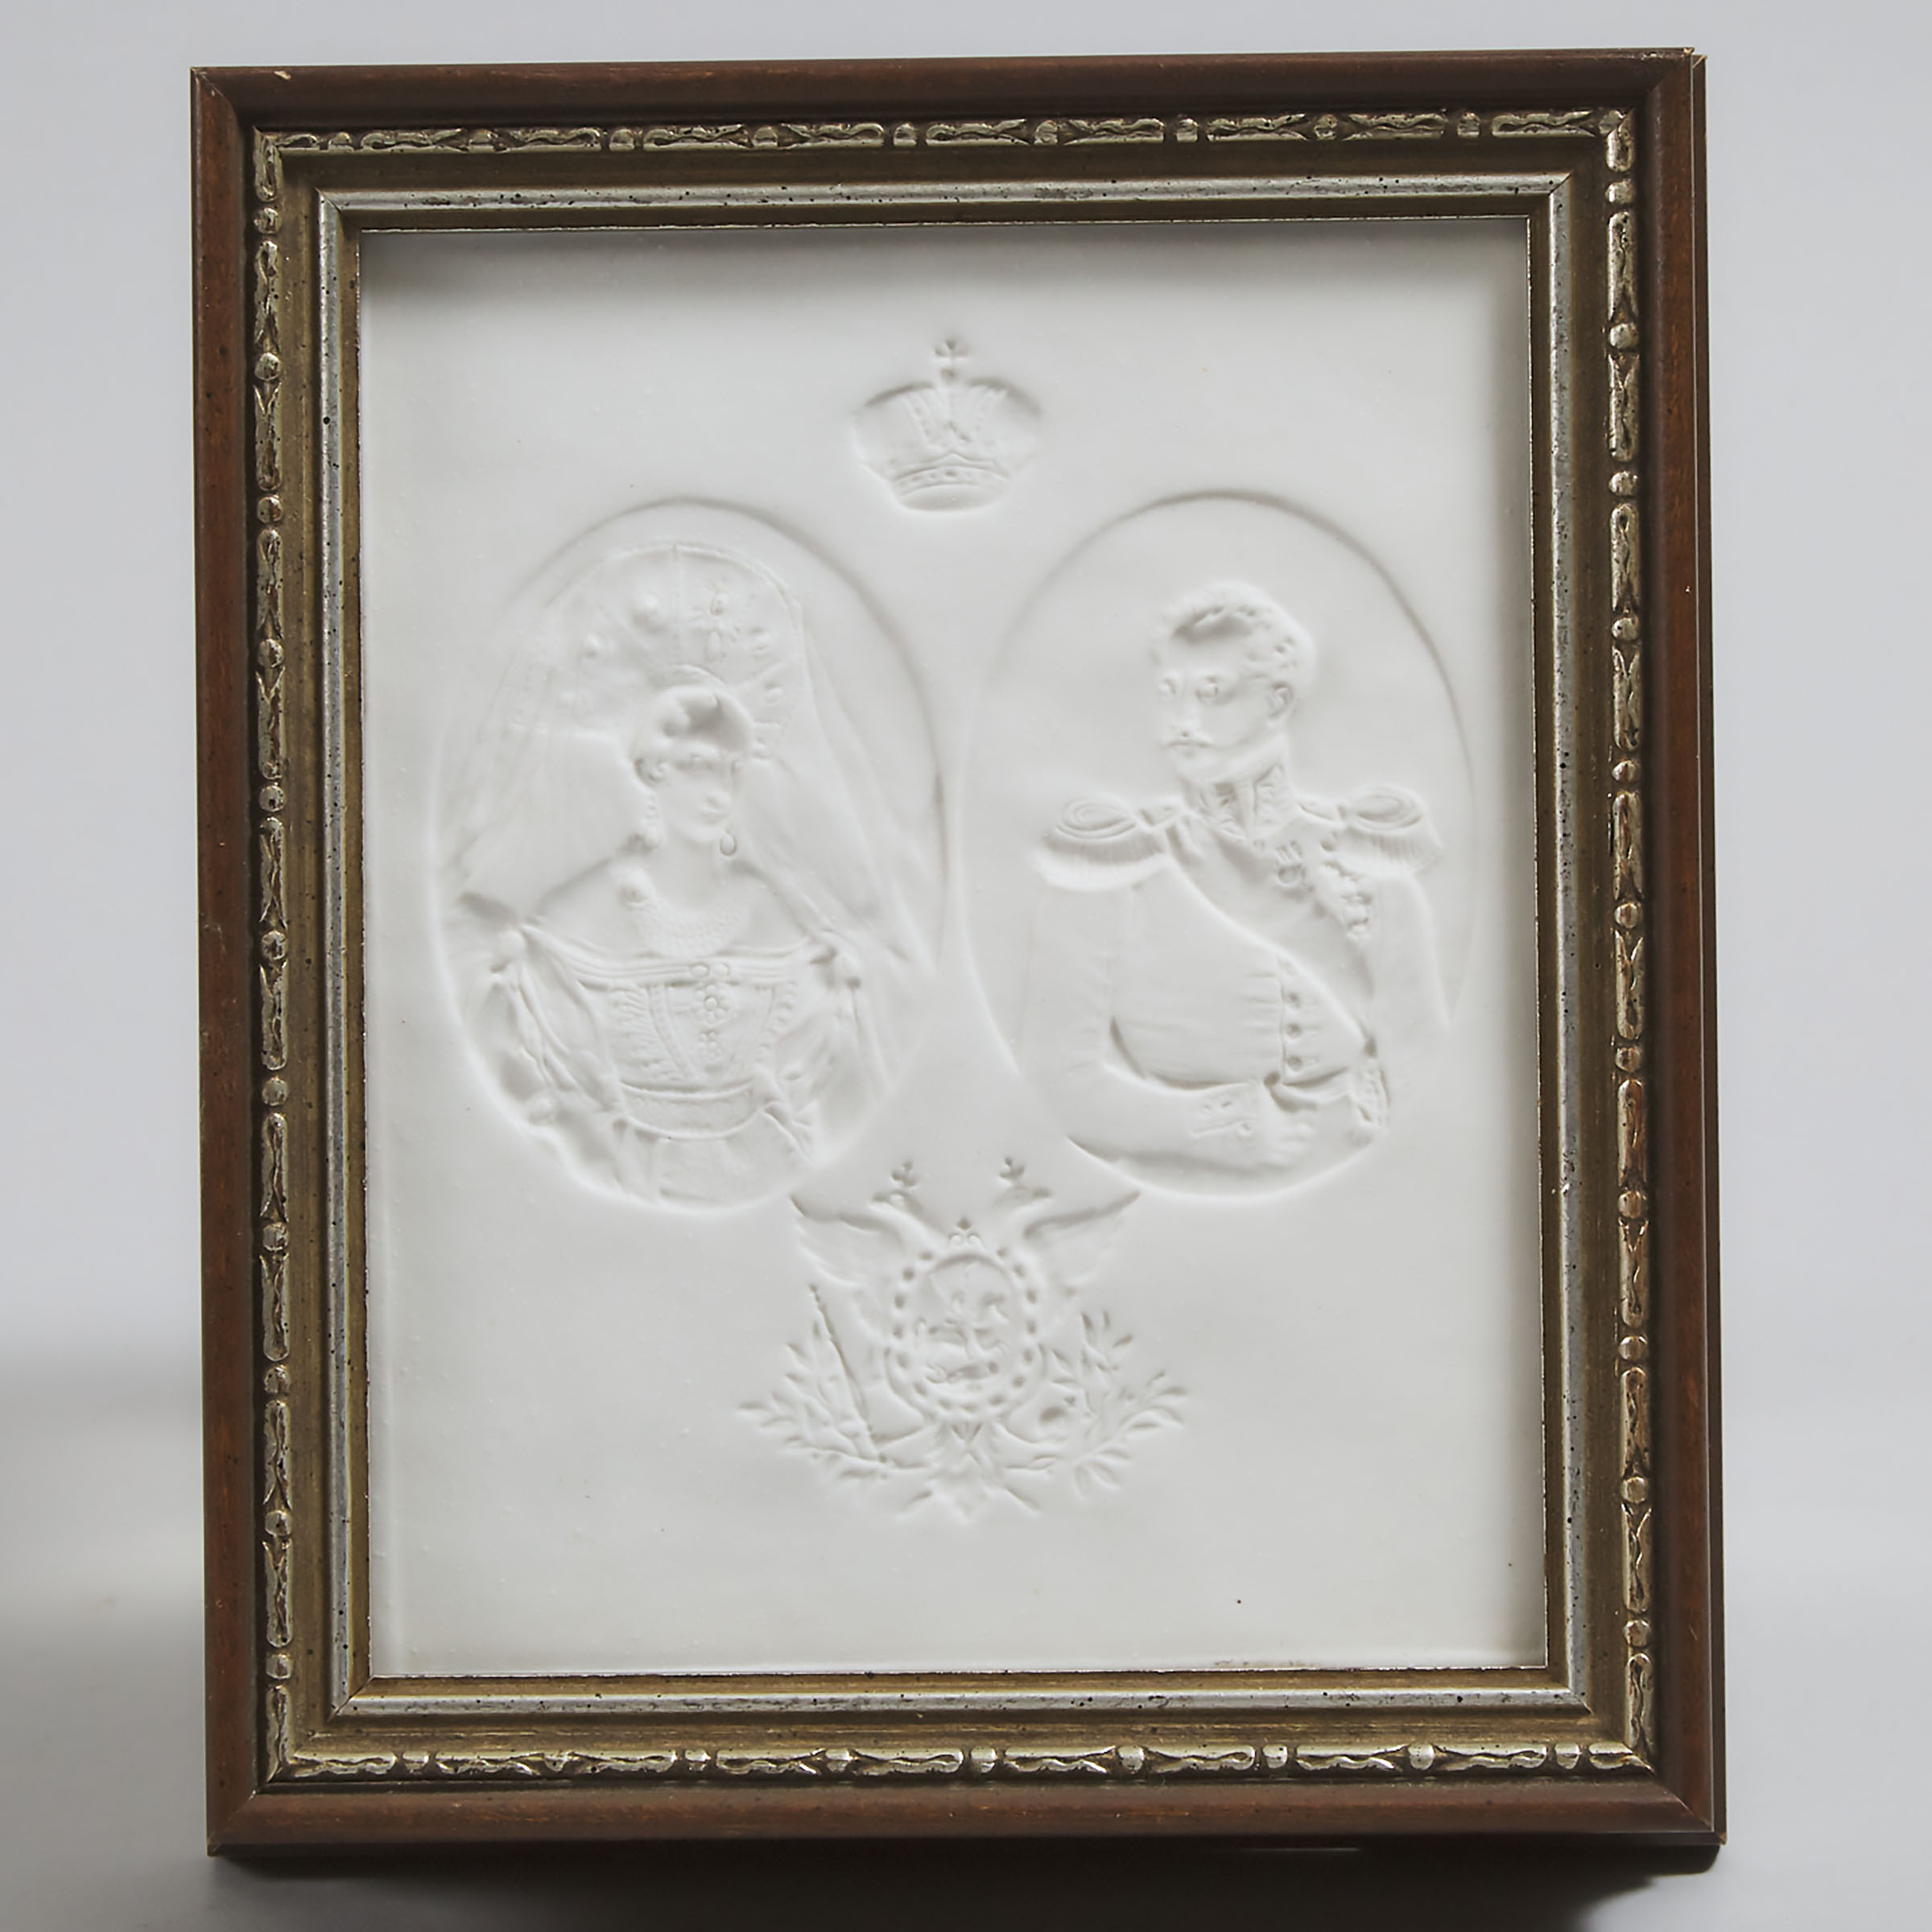 Biscuit Porcelain Lithophane Portrait Panel of Nicholas I, Emperor of Russia, and Alexandra Feodorovna, Imperial Porcelain Factory, St. Petersburg, c.1840